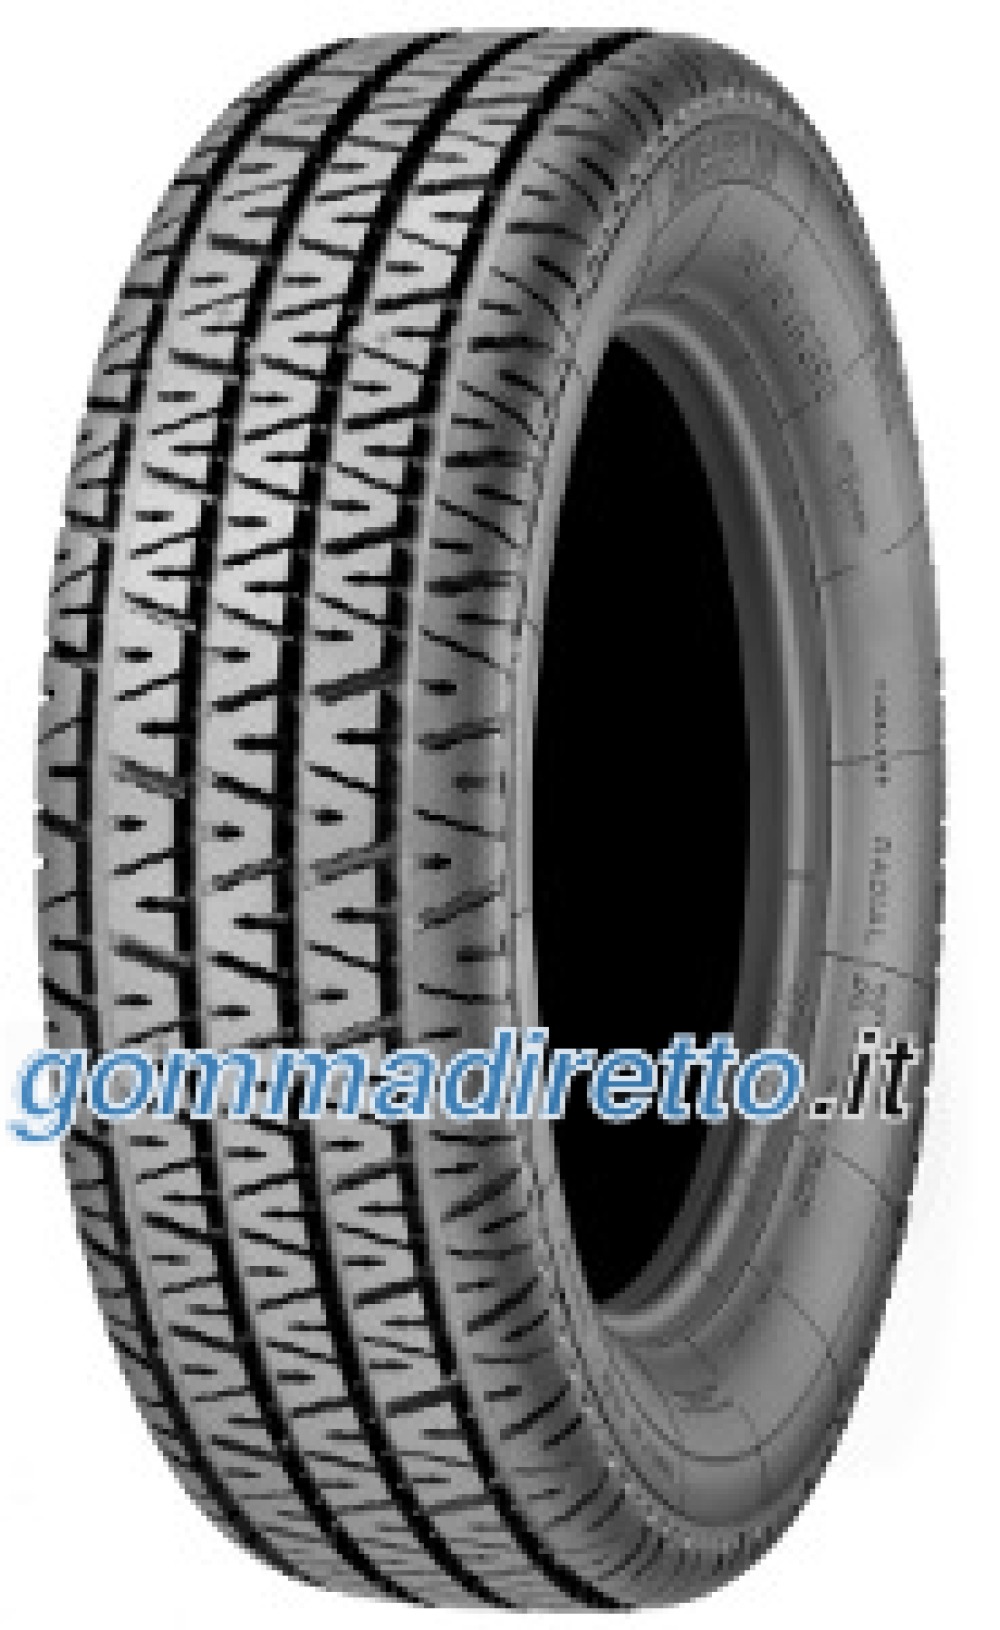 Image of Michelin Collection TRX ( 190/55 R340 81V )